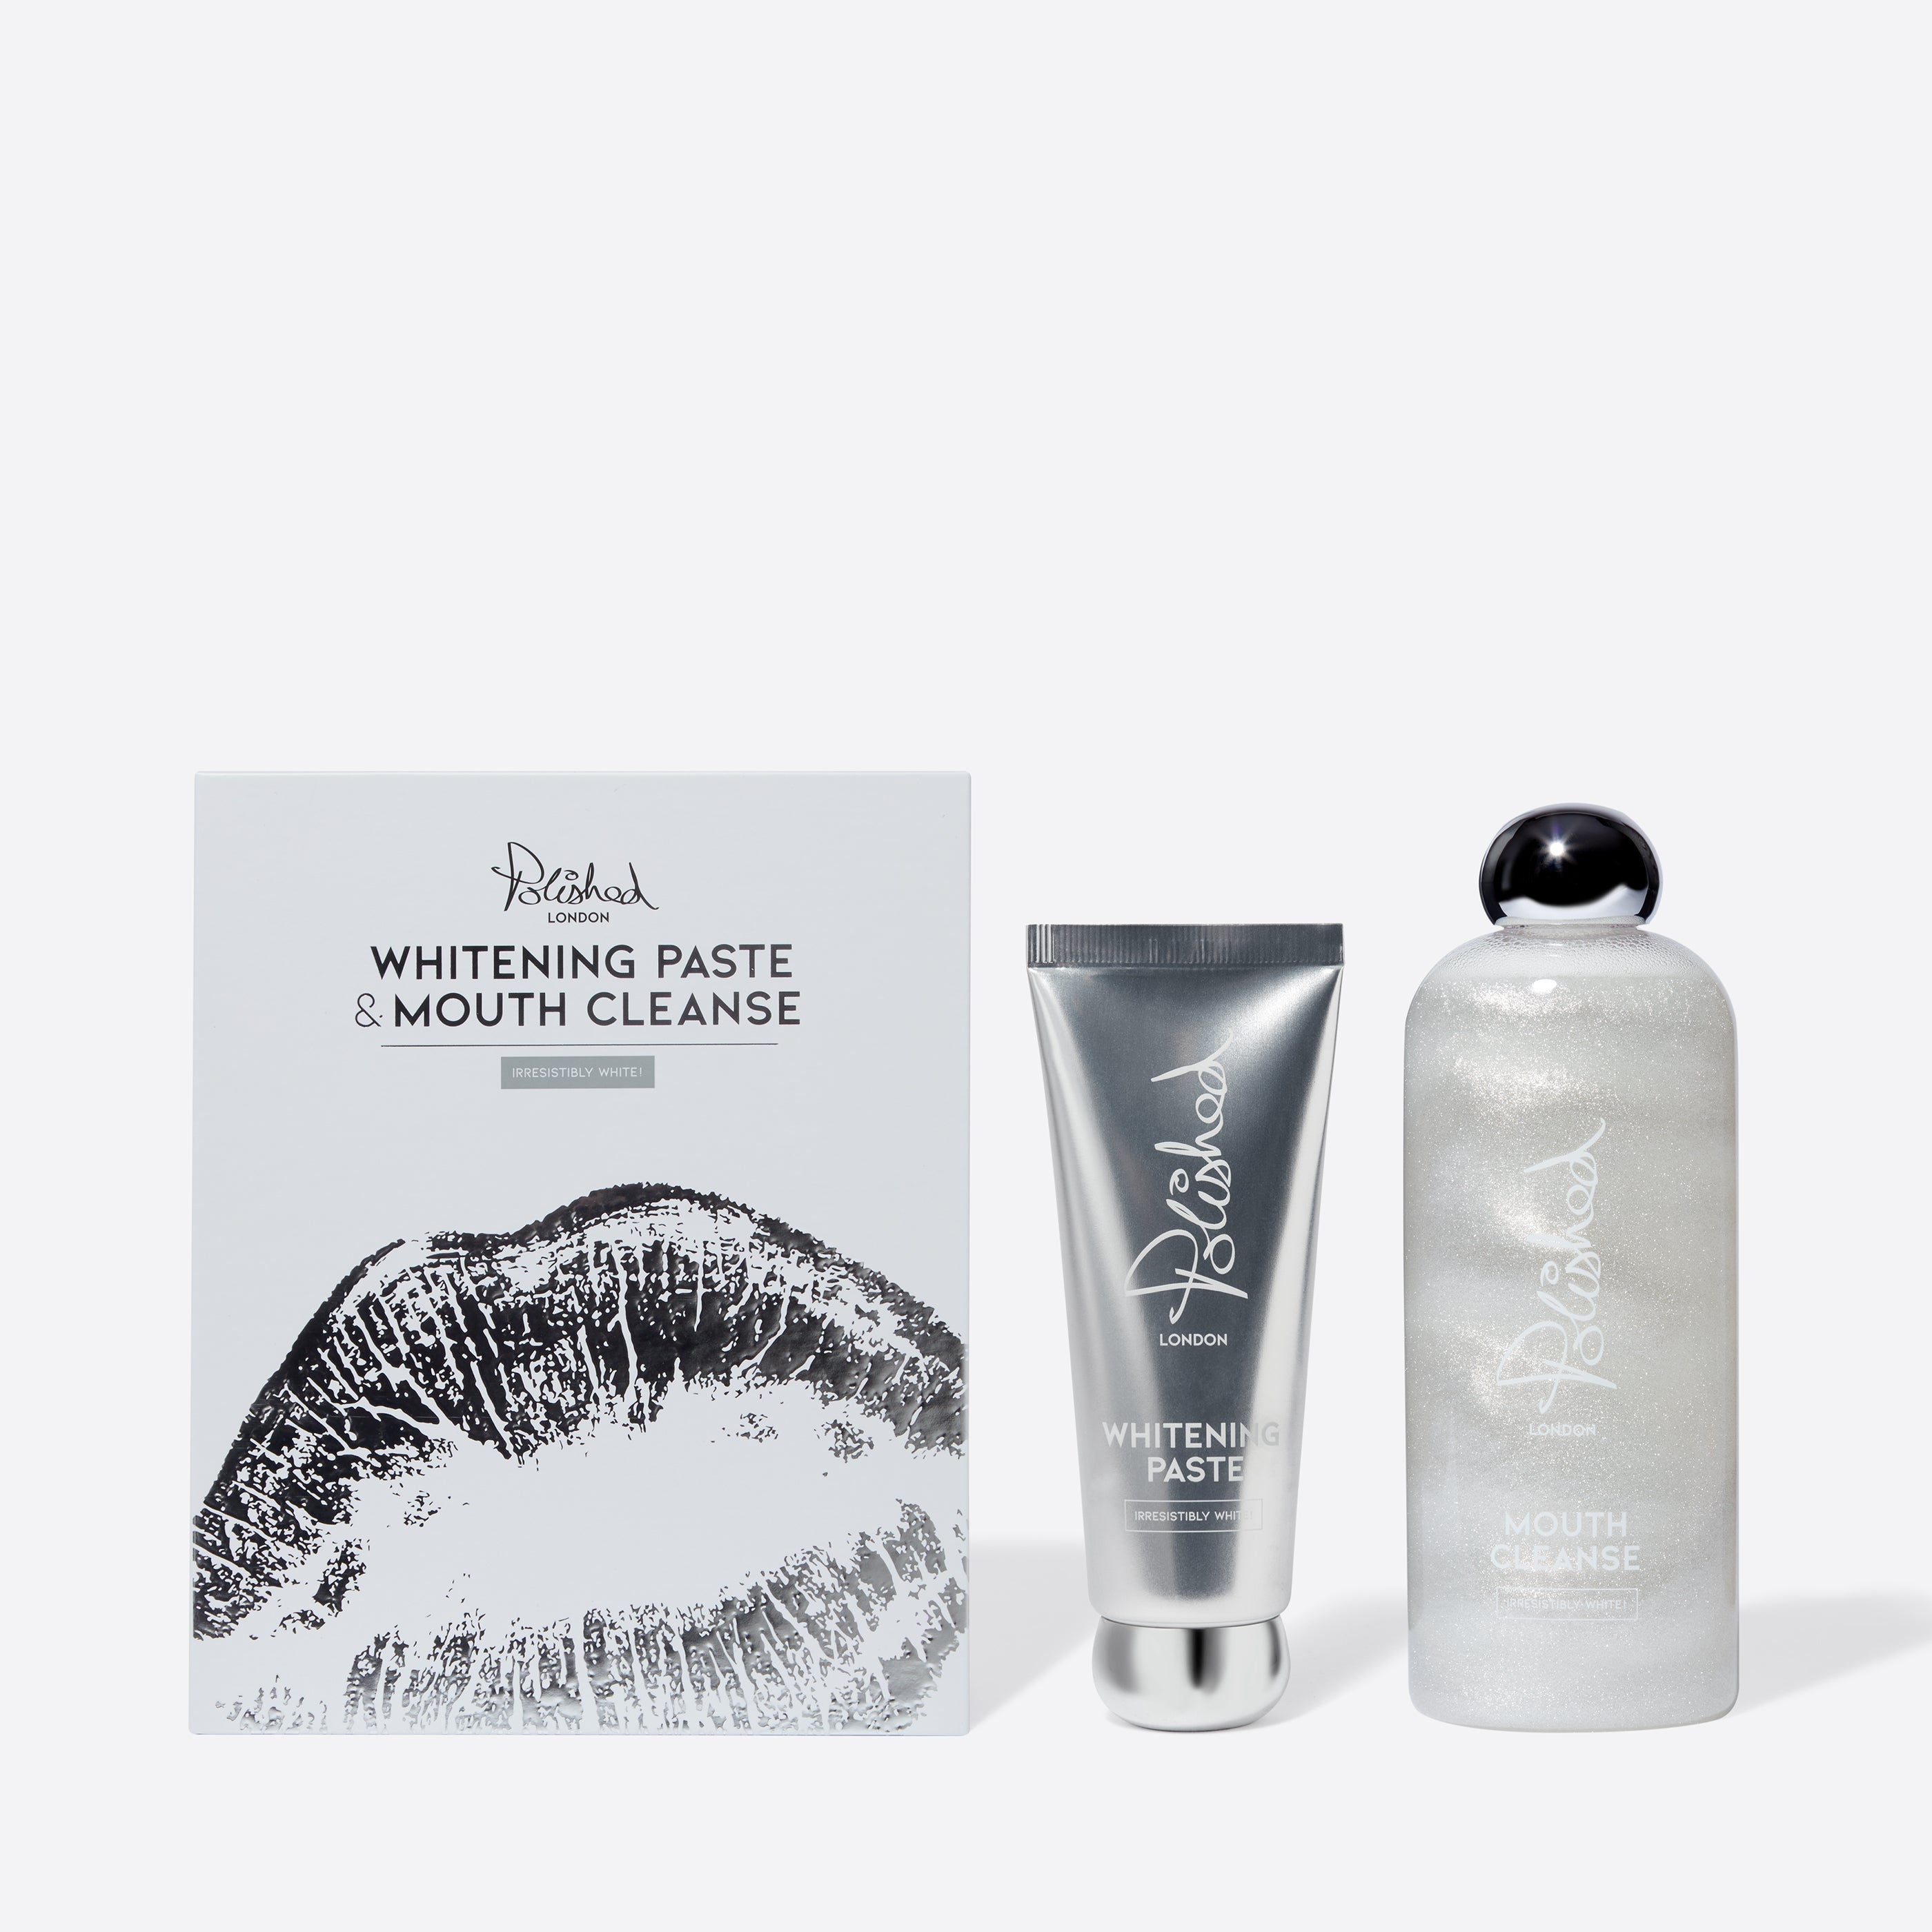 Whitening Paste & Mouth Cleanse Set